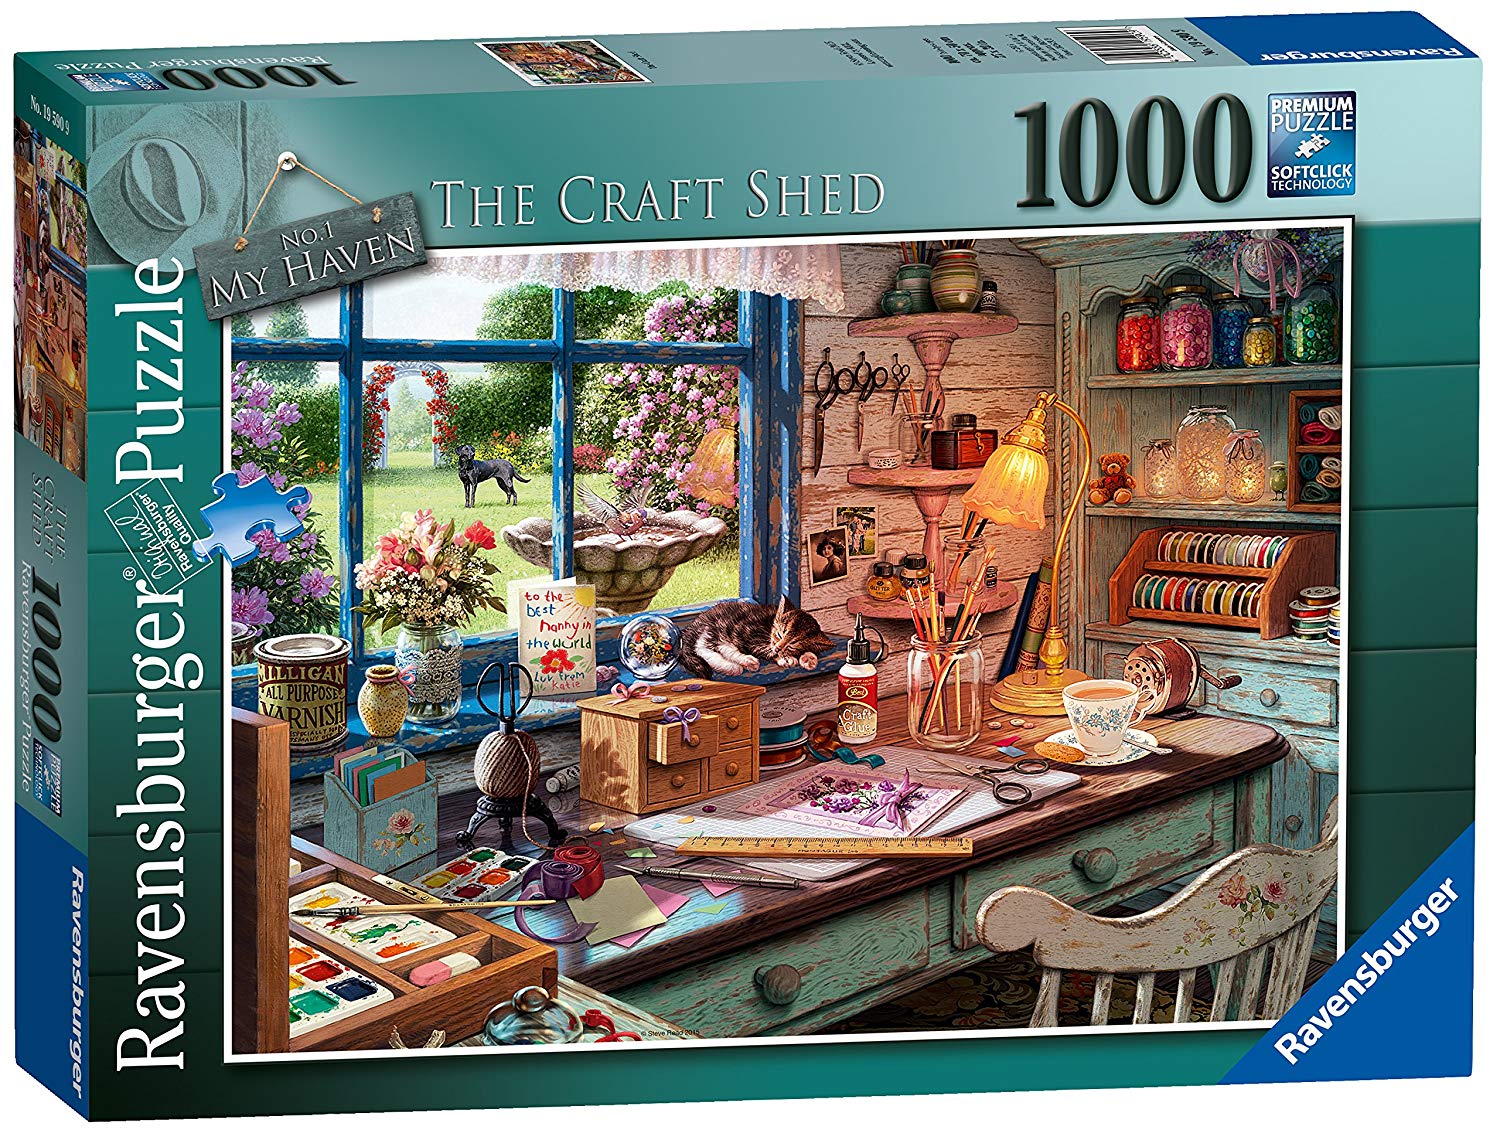 My Haven No The Craft Shed Pc Jigsaw Puzzle